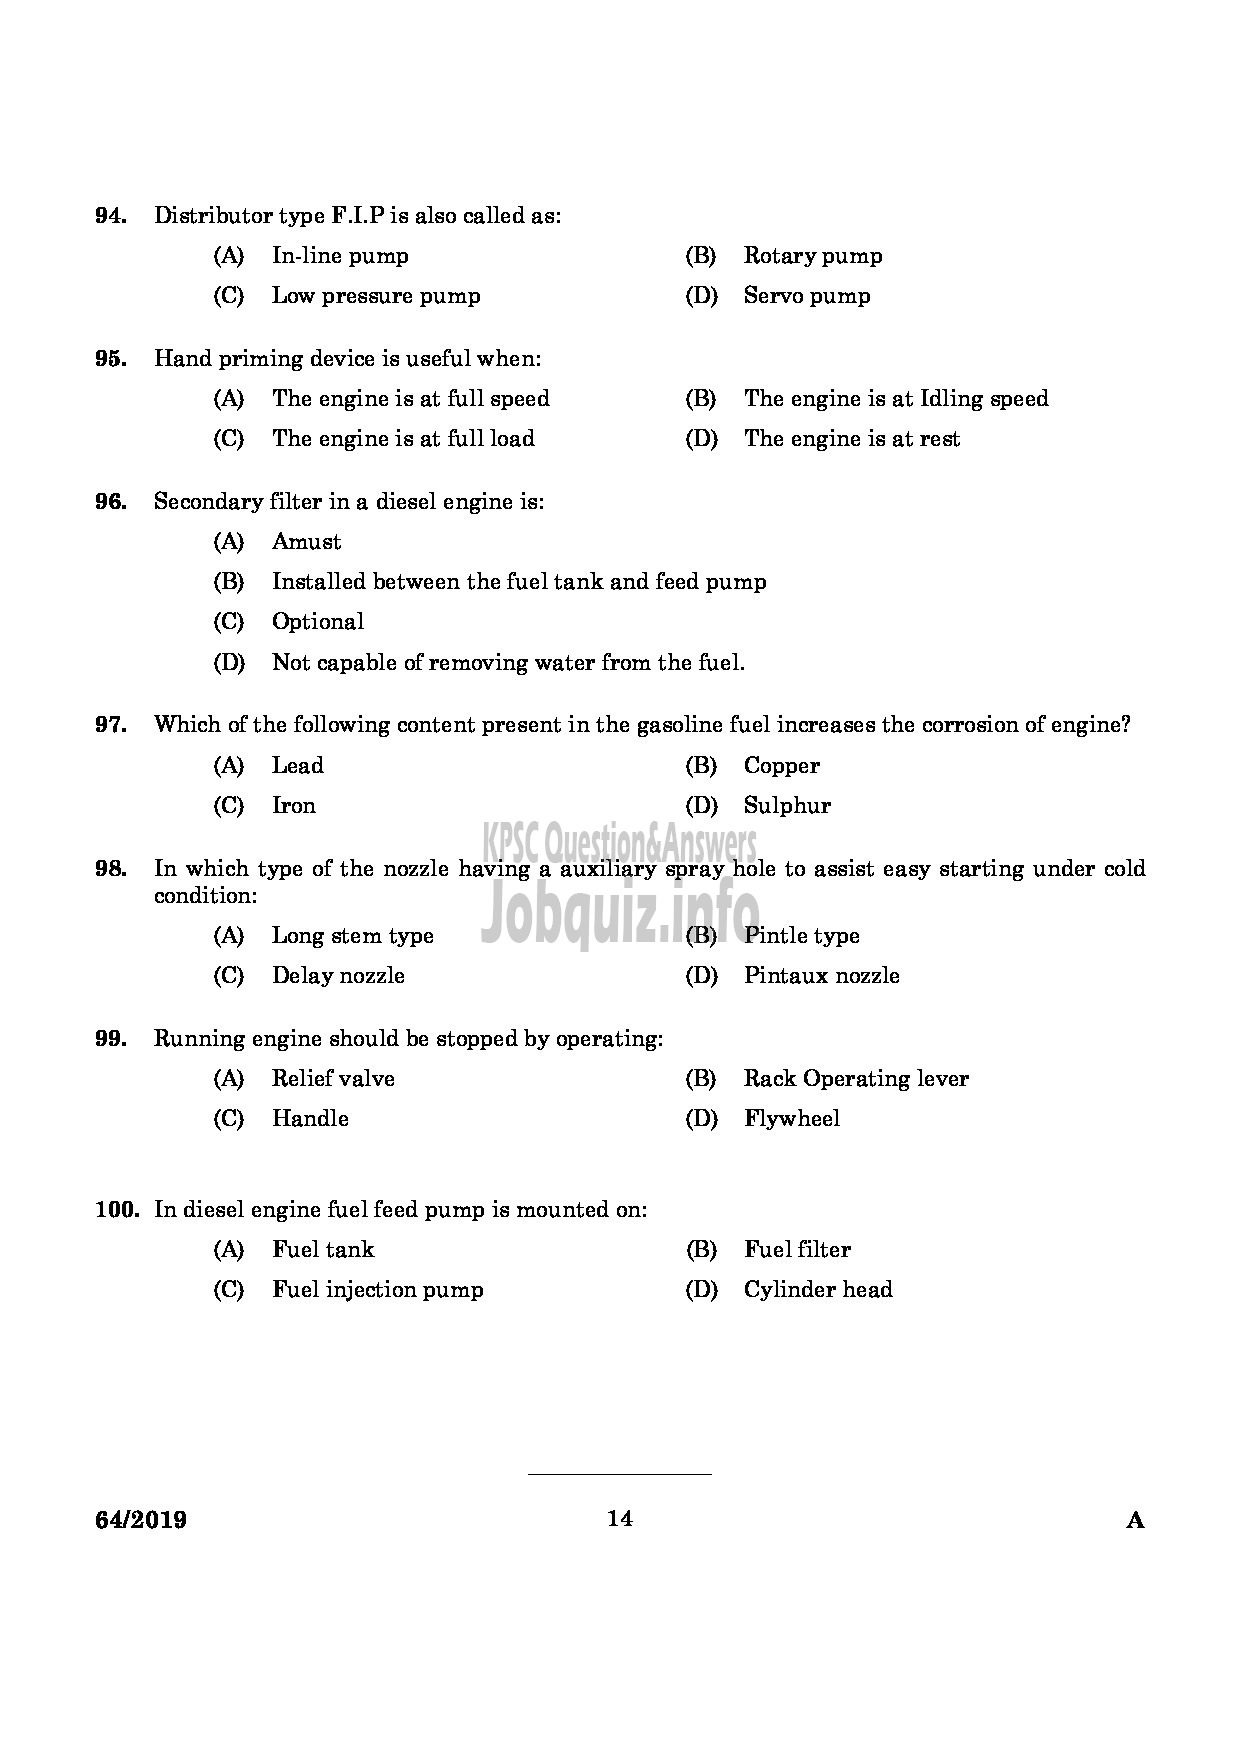 Kerala PSC Question Paper - DRILLING ASSISTANT GROUND WATER DEPARTMENT English -12